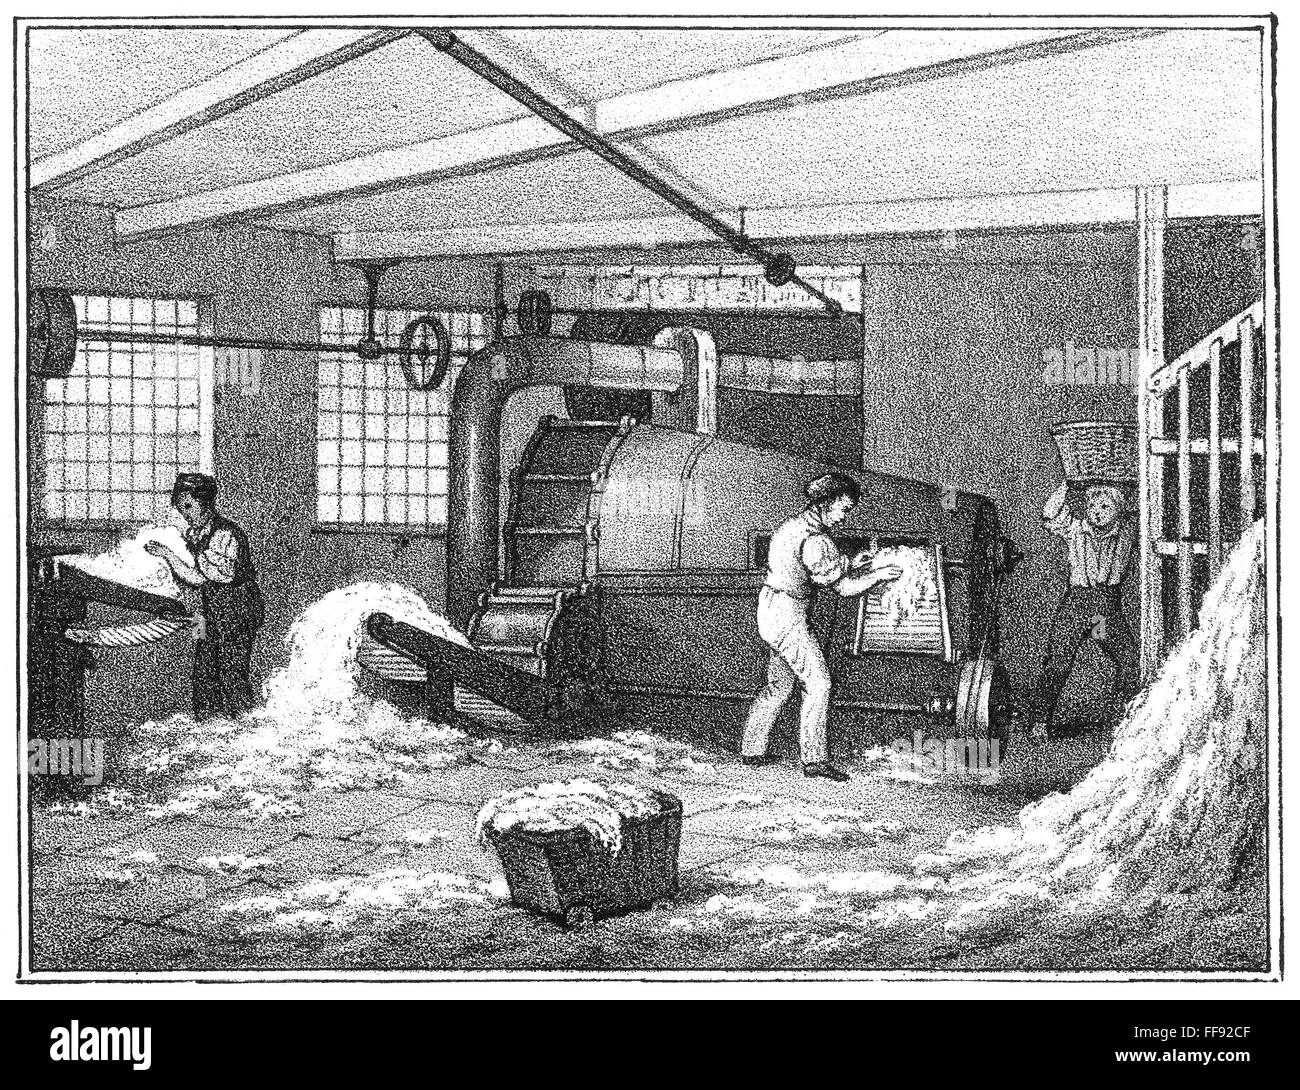 TEXTILE MILL: COTTON. /nBatting: interior view of a Manchester cotton manufactures mill. Lithograph, English, c. 1840. Stock Photo